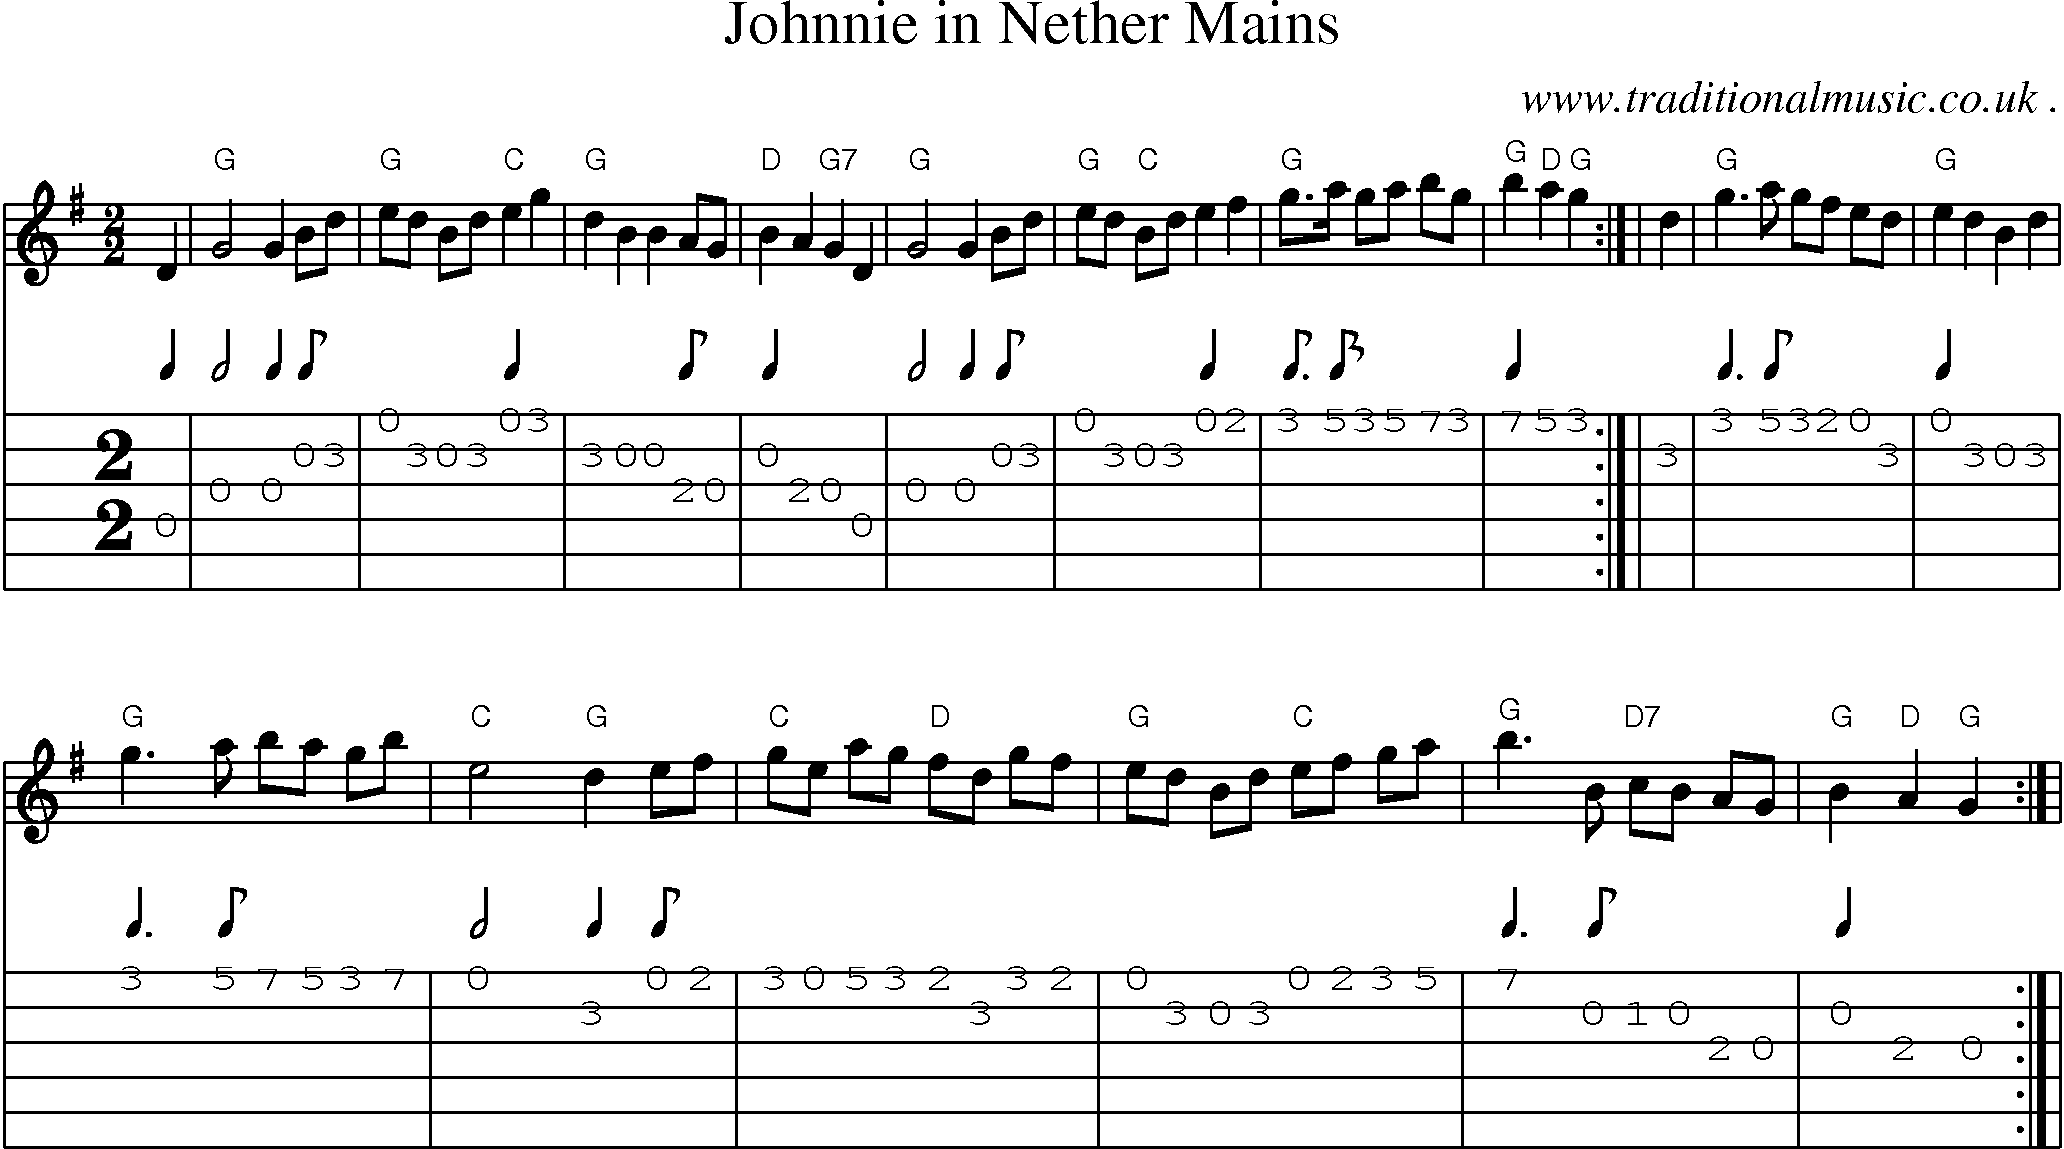 Sheet-music  score, Chords and Guitar Tabs for Johnnie In Nether Mains